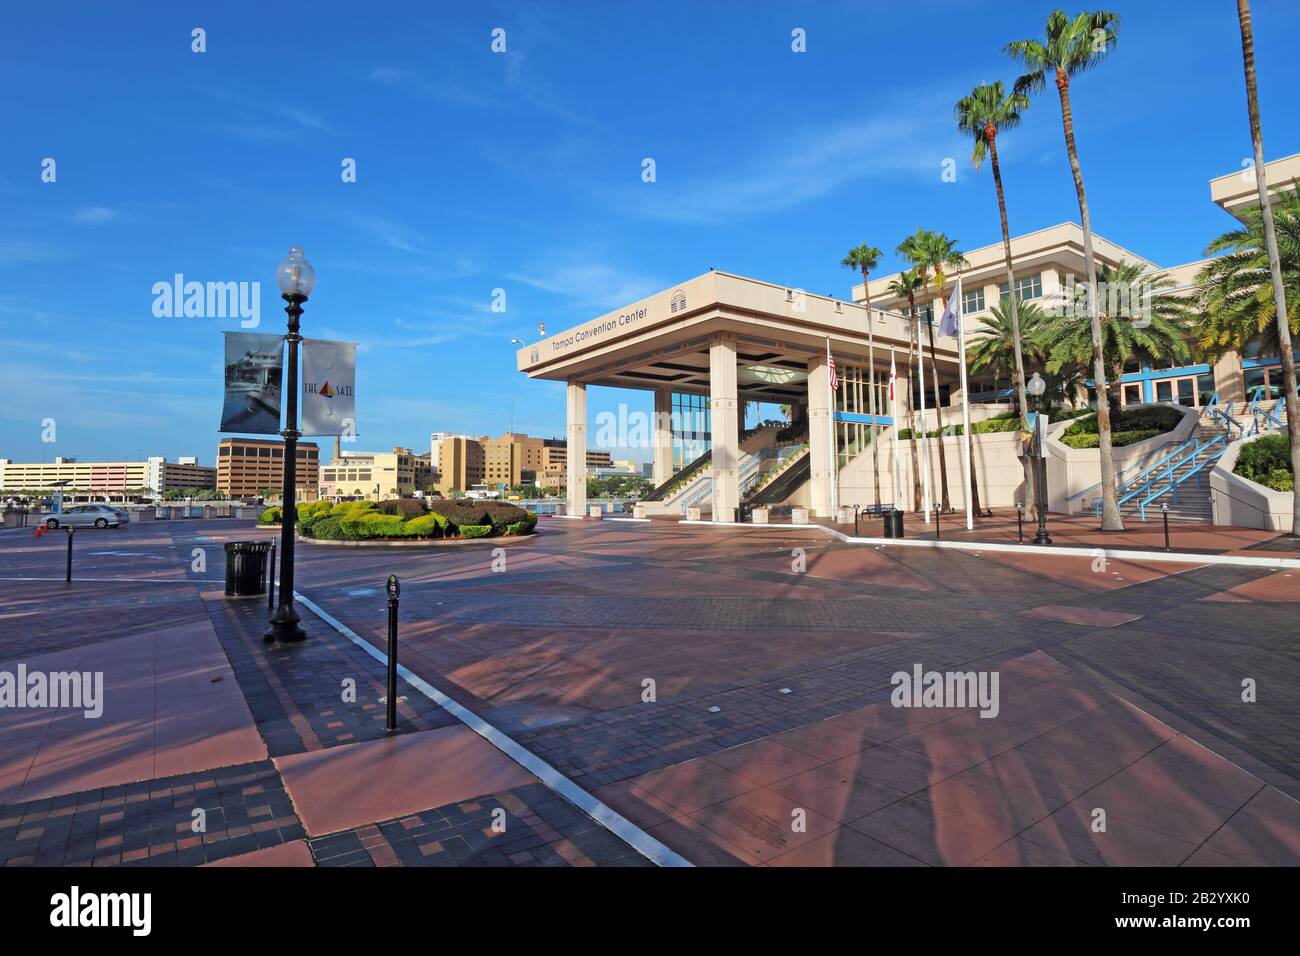 TAMPA, FLORIDA C AUGUST 1 2016: The main entrance to the Tampa Convention Center. This mid-sized facility at the mouth of the Hillsborough River Stock Photo